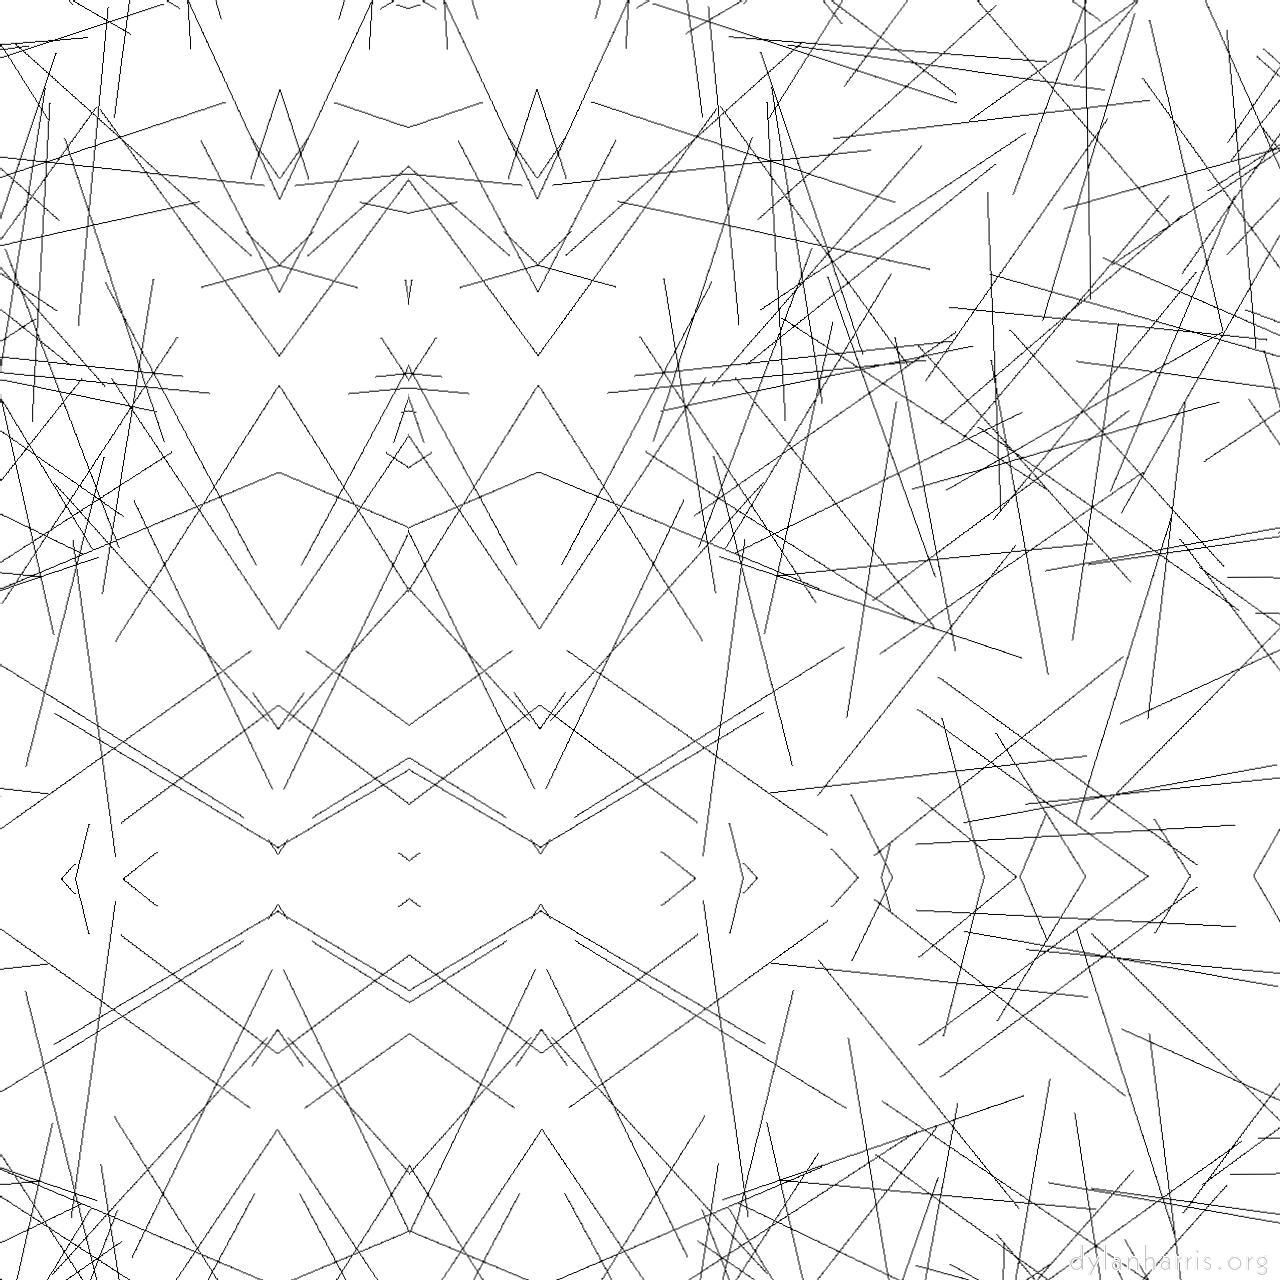 variations :: abstract line drawing 1